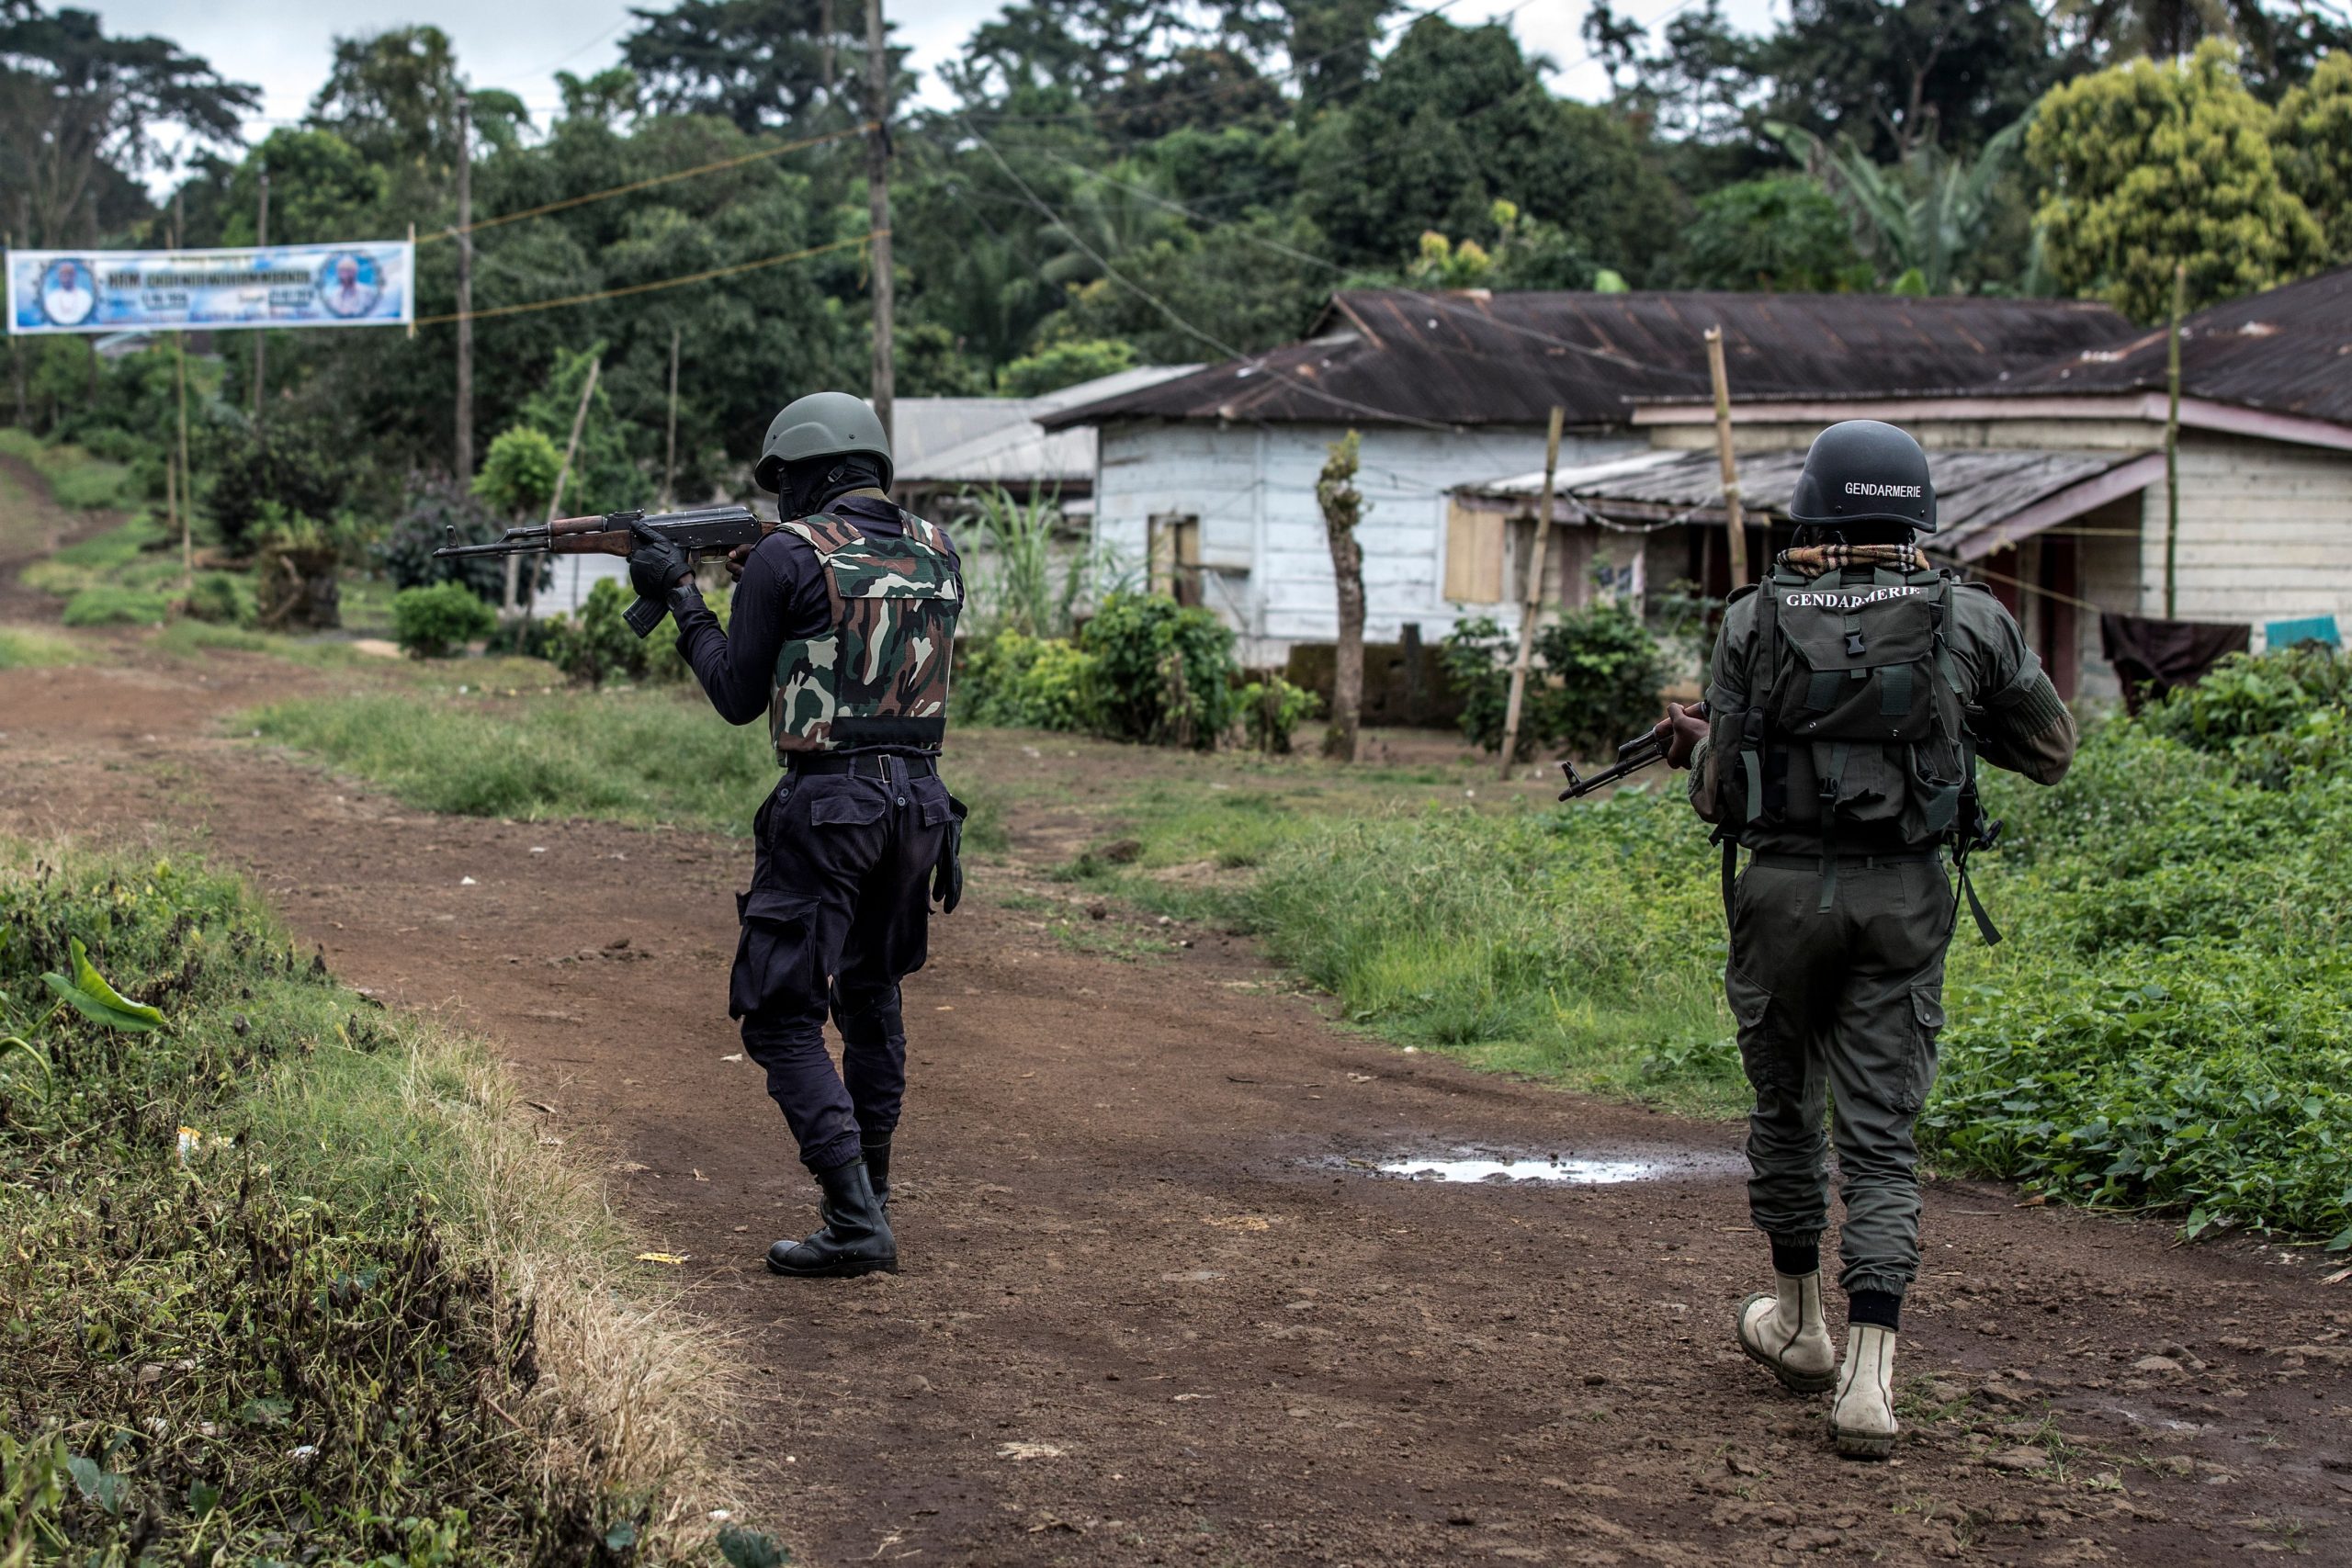 Security forces patrol an English-speaking region of Cameroon (Photo: Marco Longari / AFP via Getty)